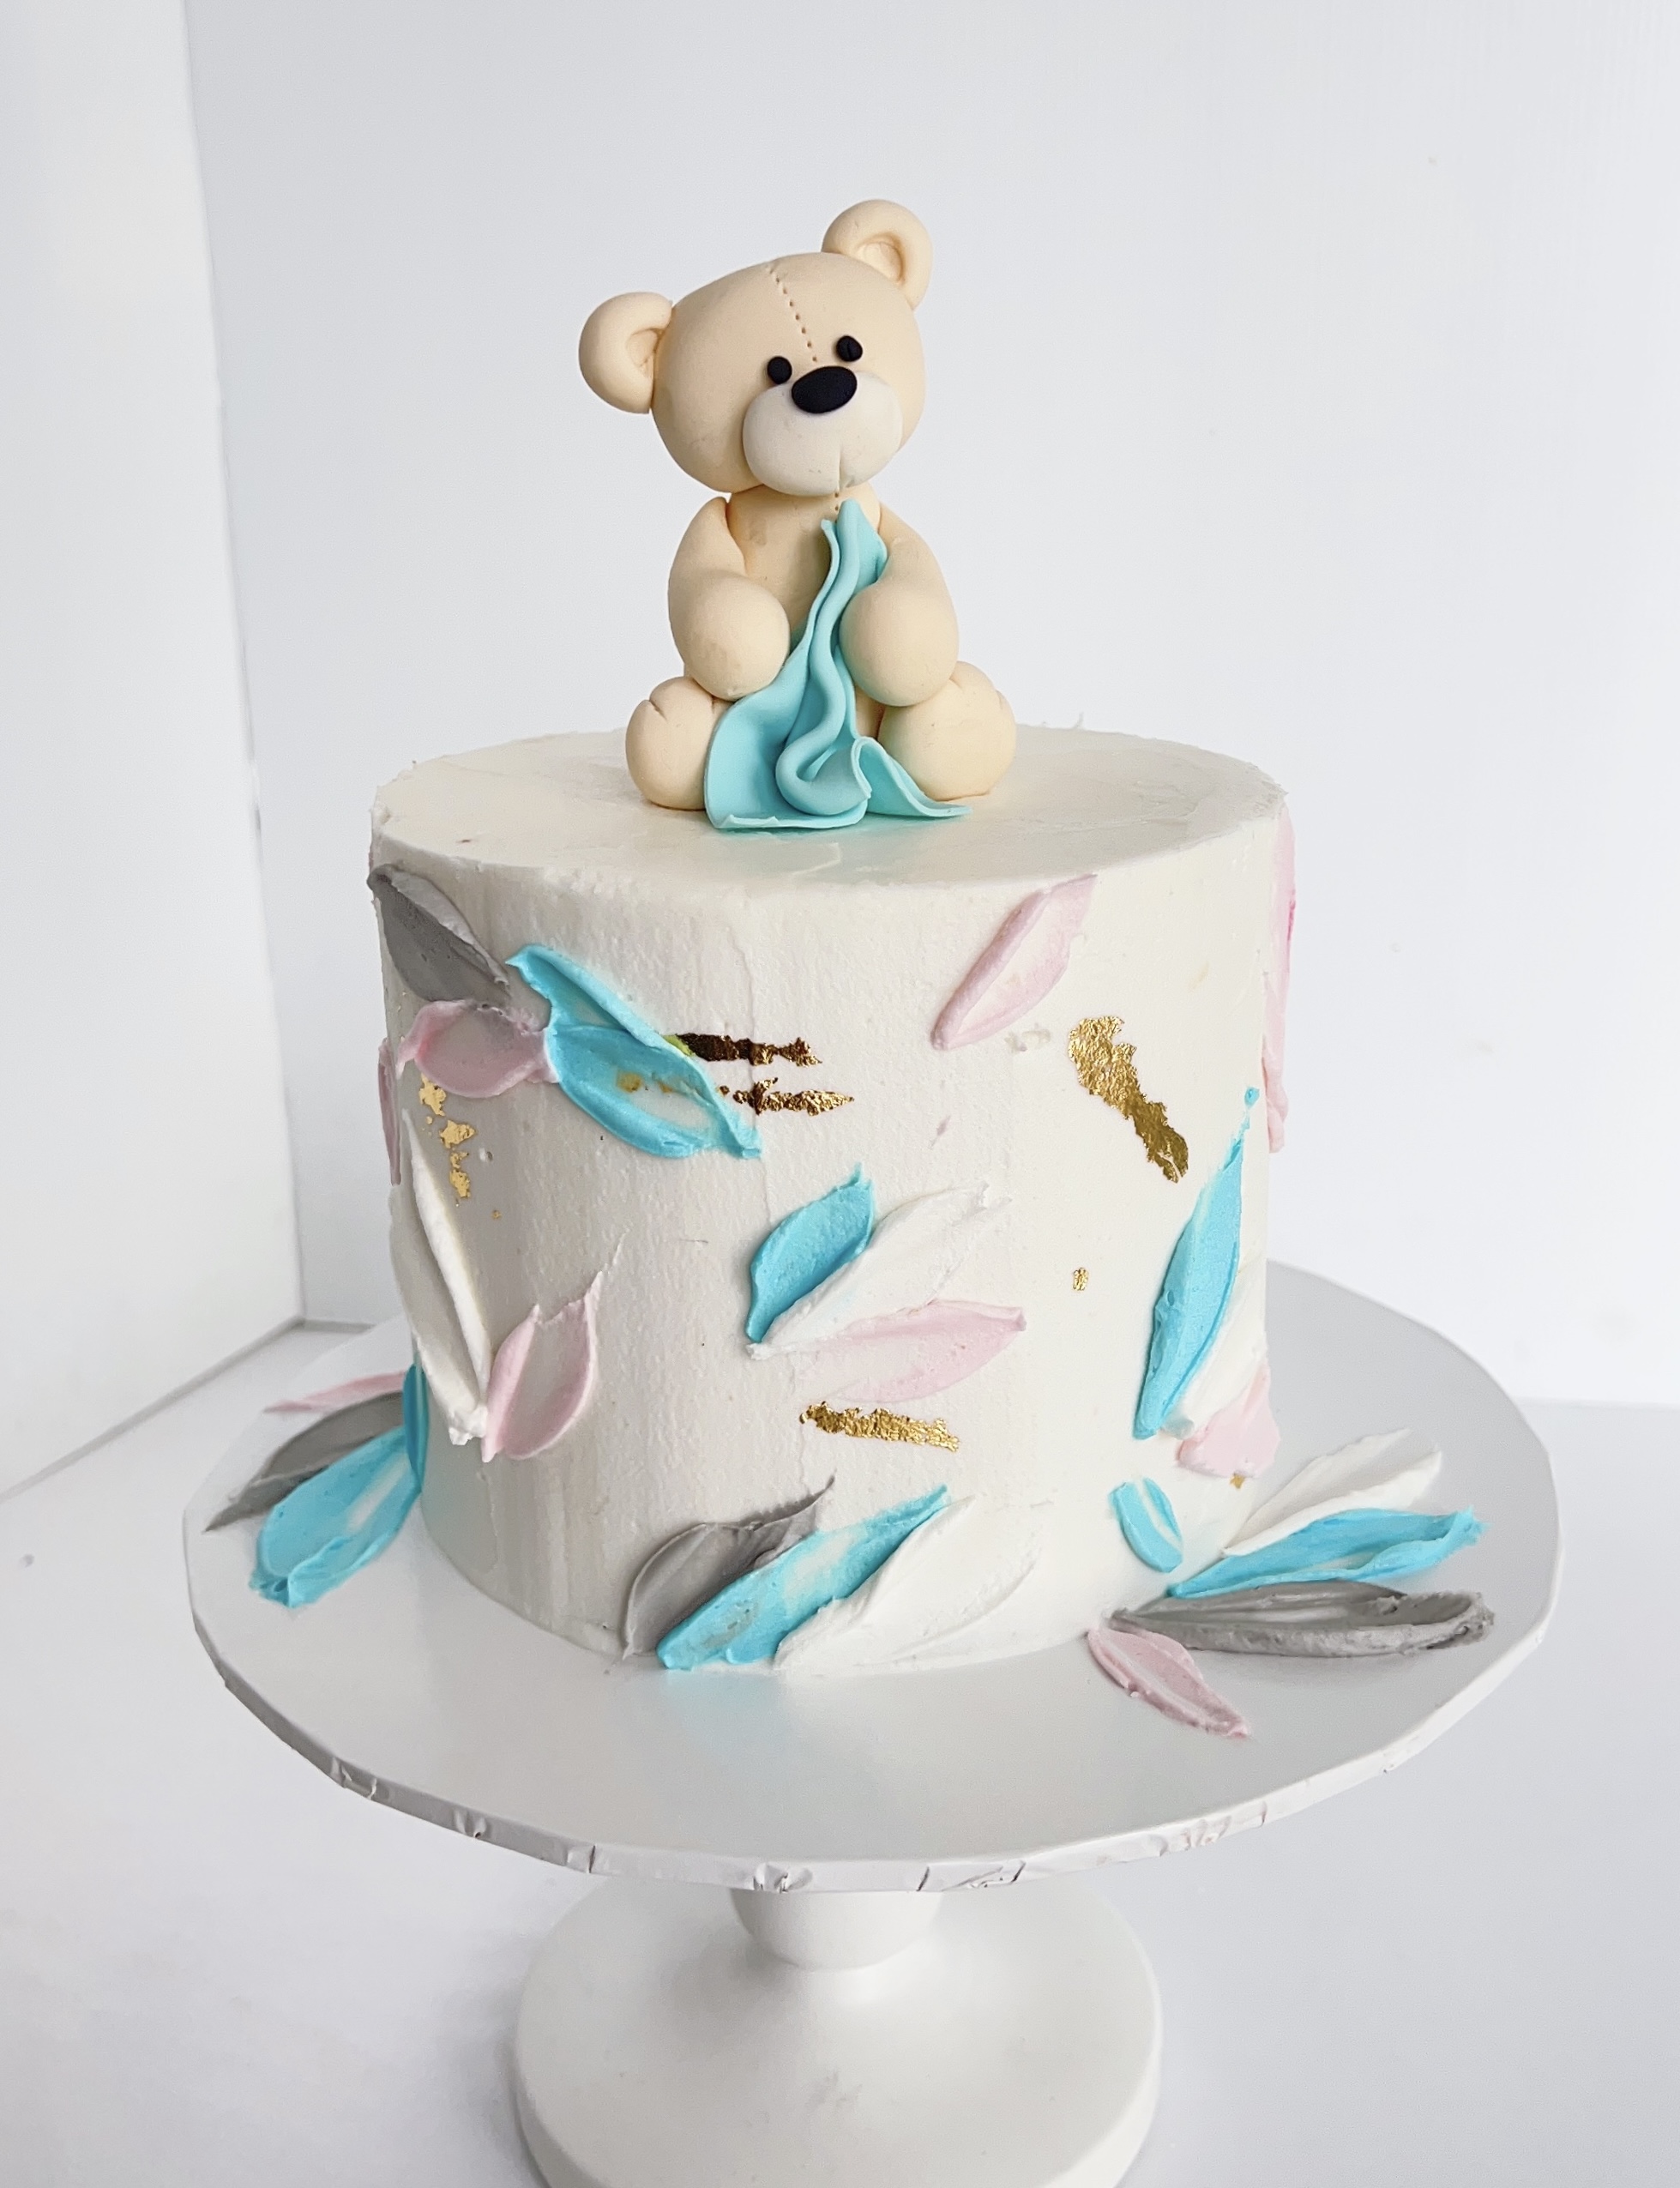 Types of Baby Shower Cake and Decorating Ideas – Baby Shower Ideas 4U-mncb.edu.vn